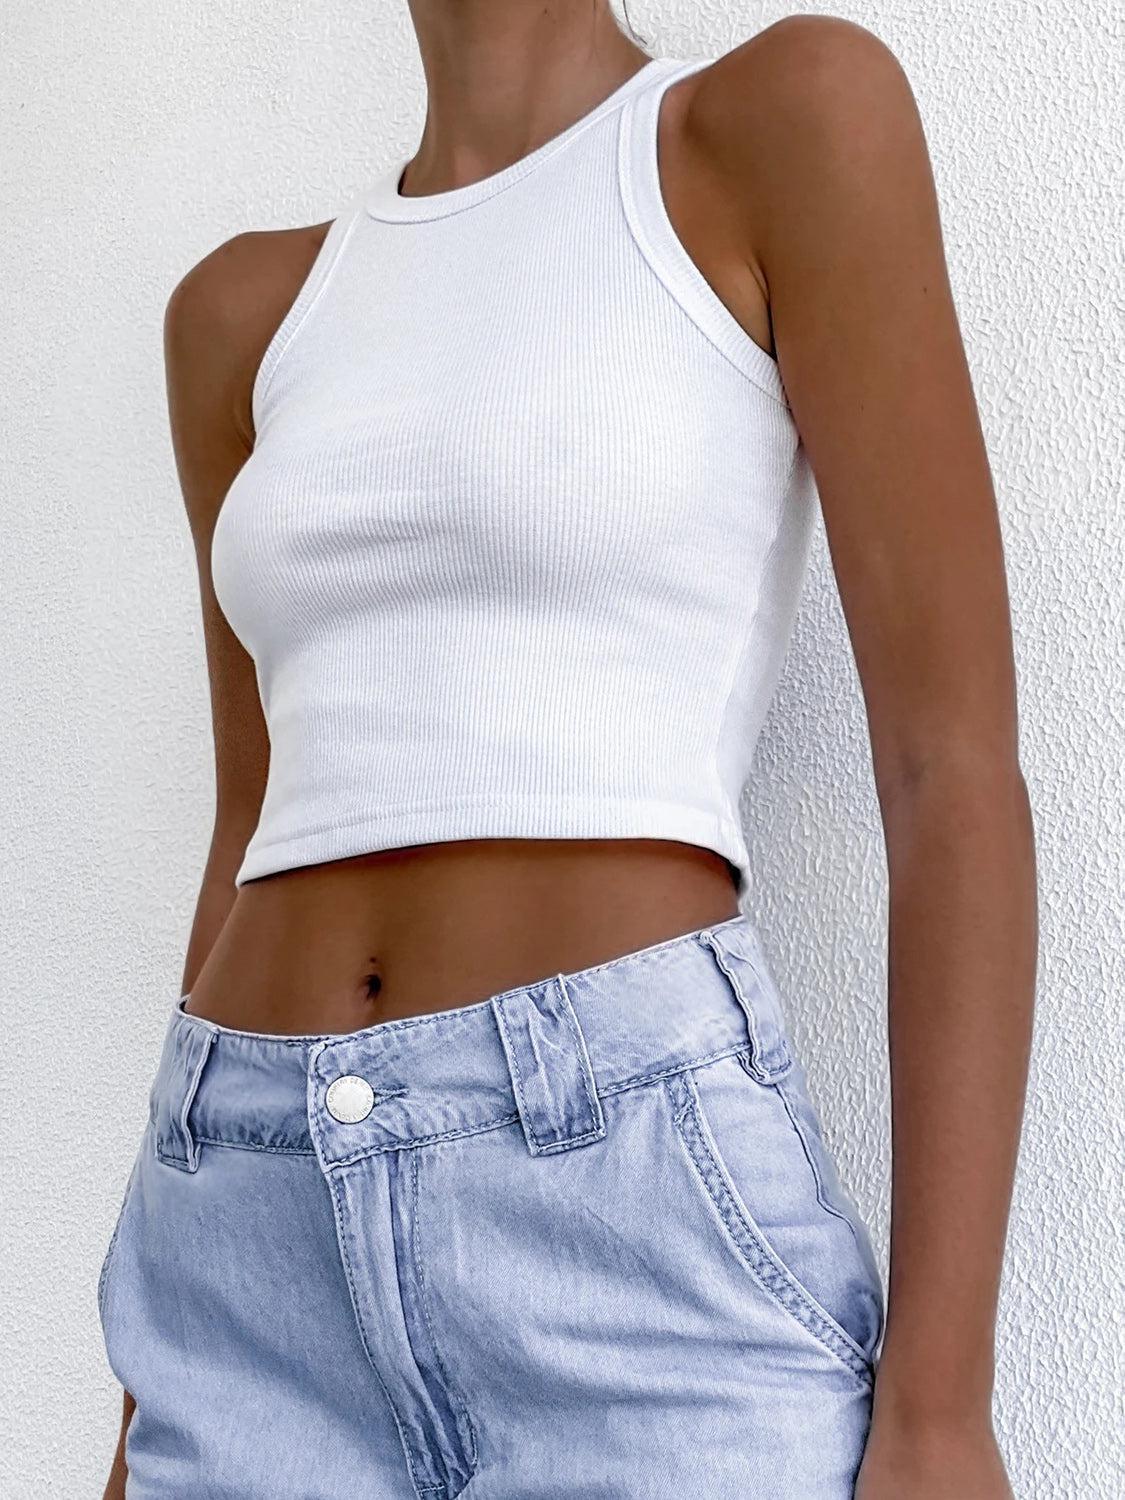 a woman wearing a white crop top and denim shorts